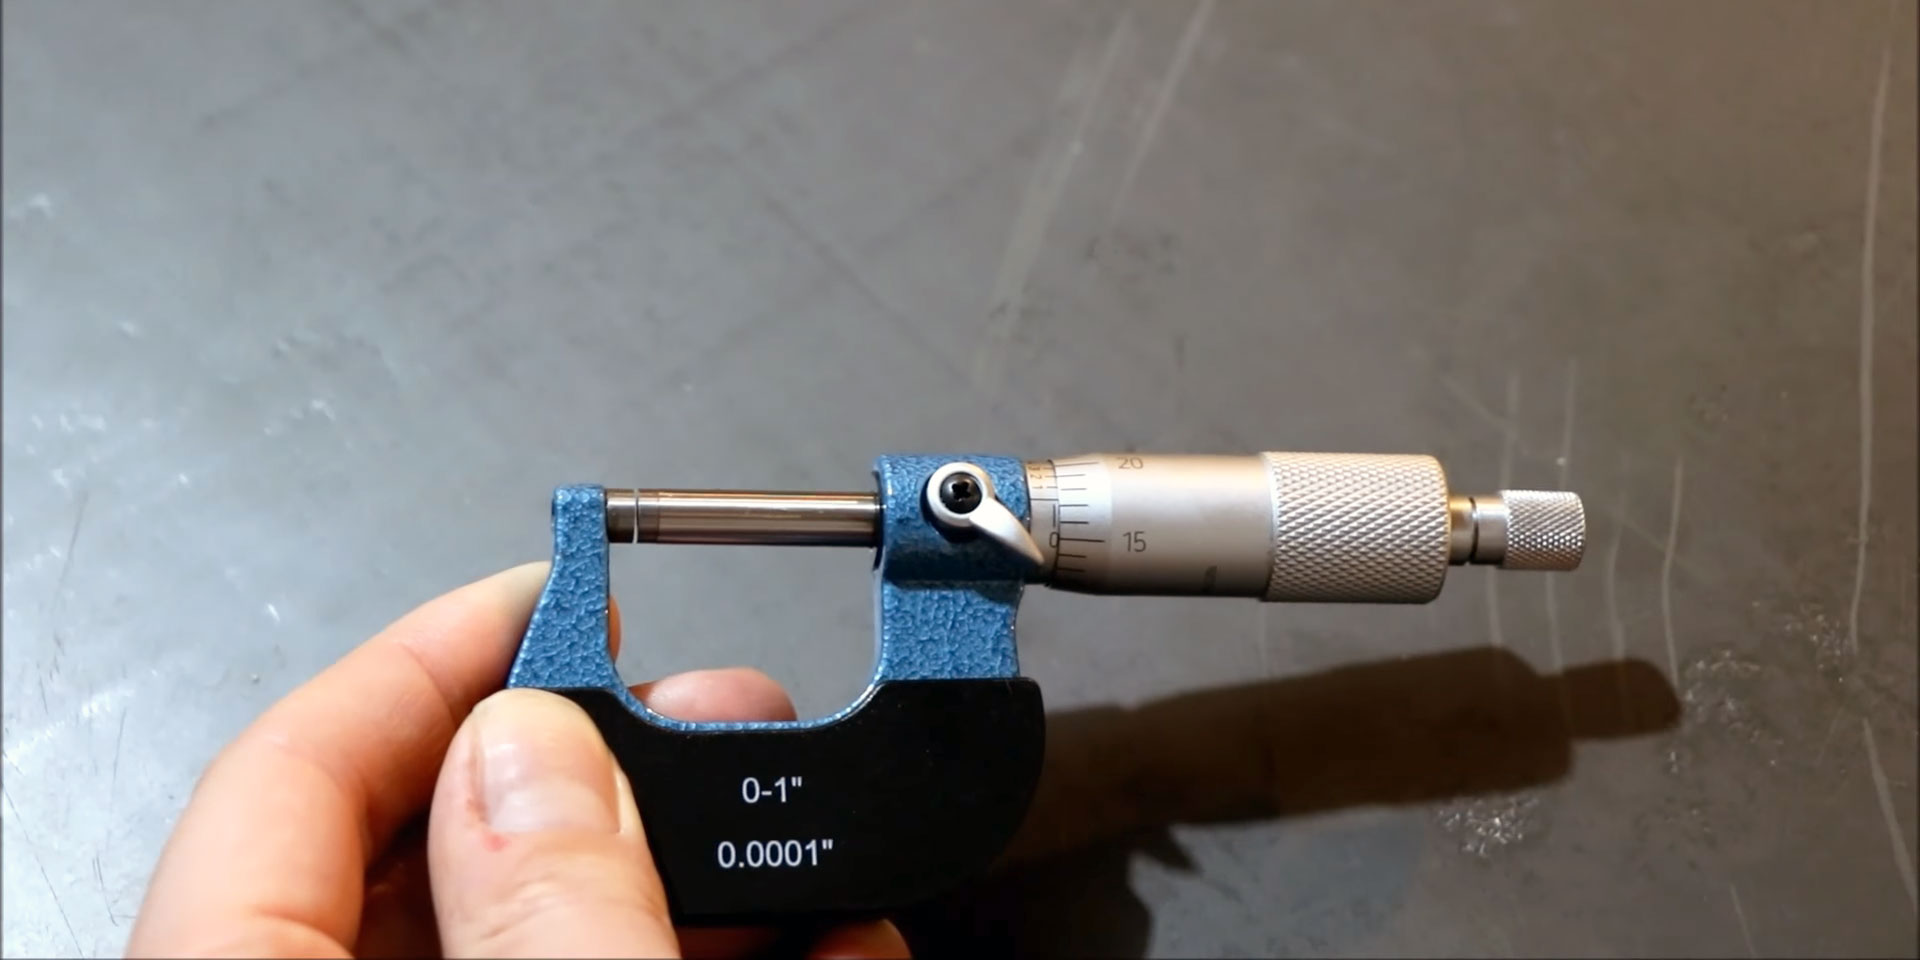 How to calibrate a micrometer